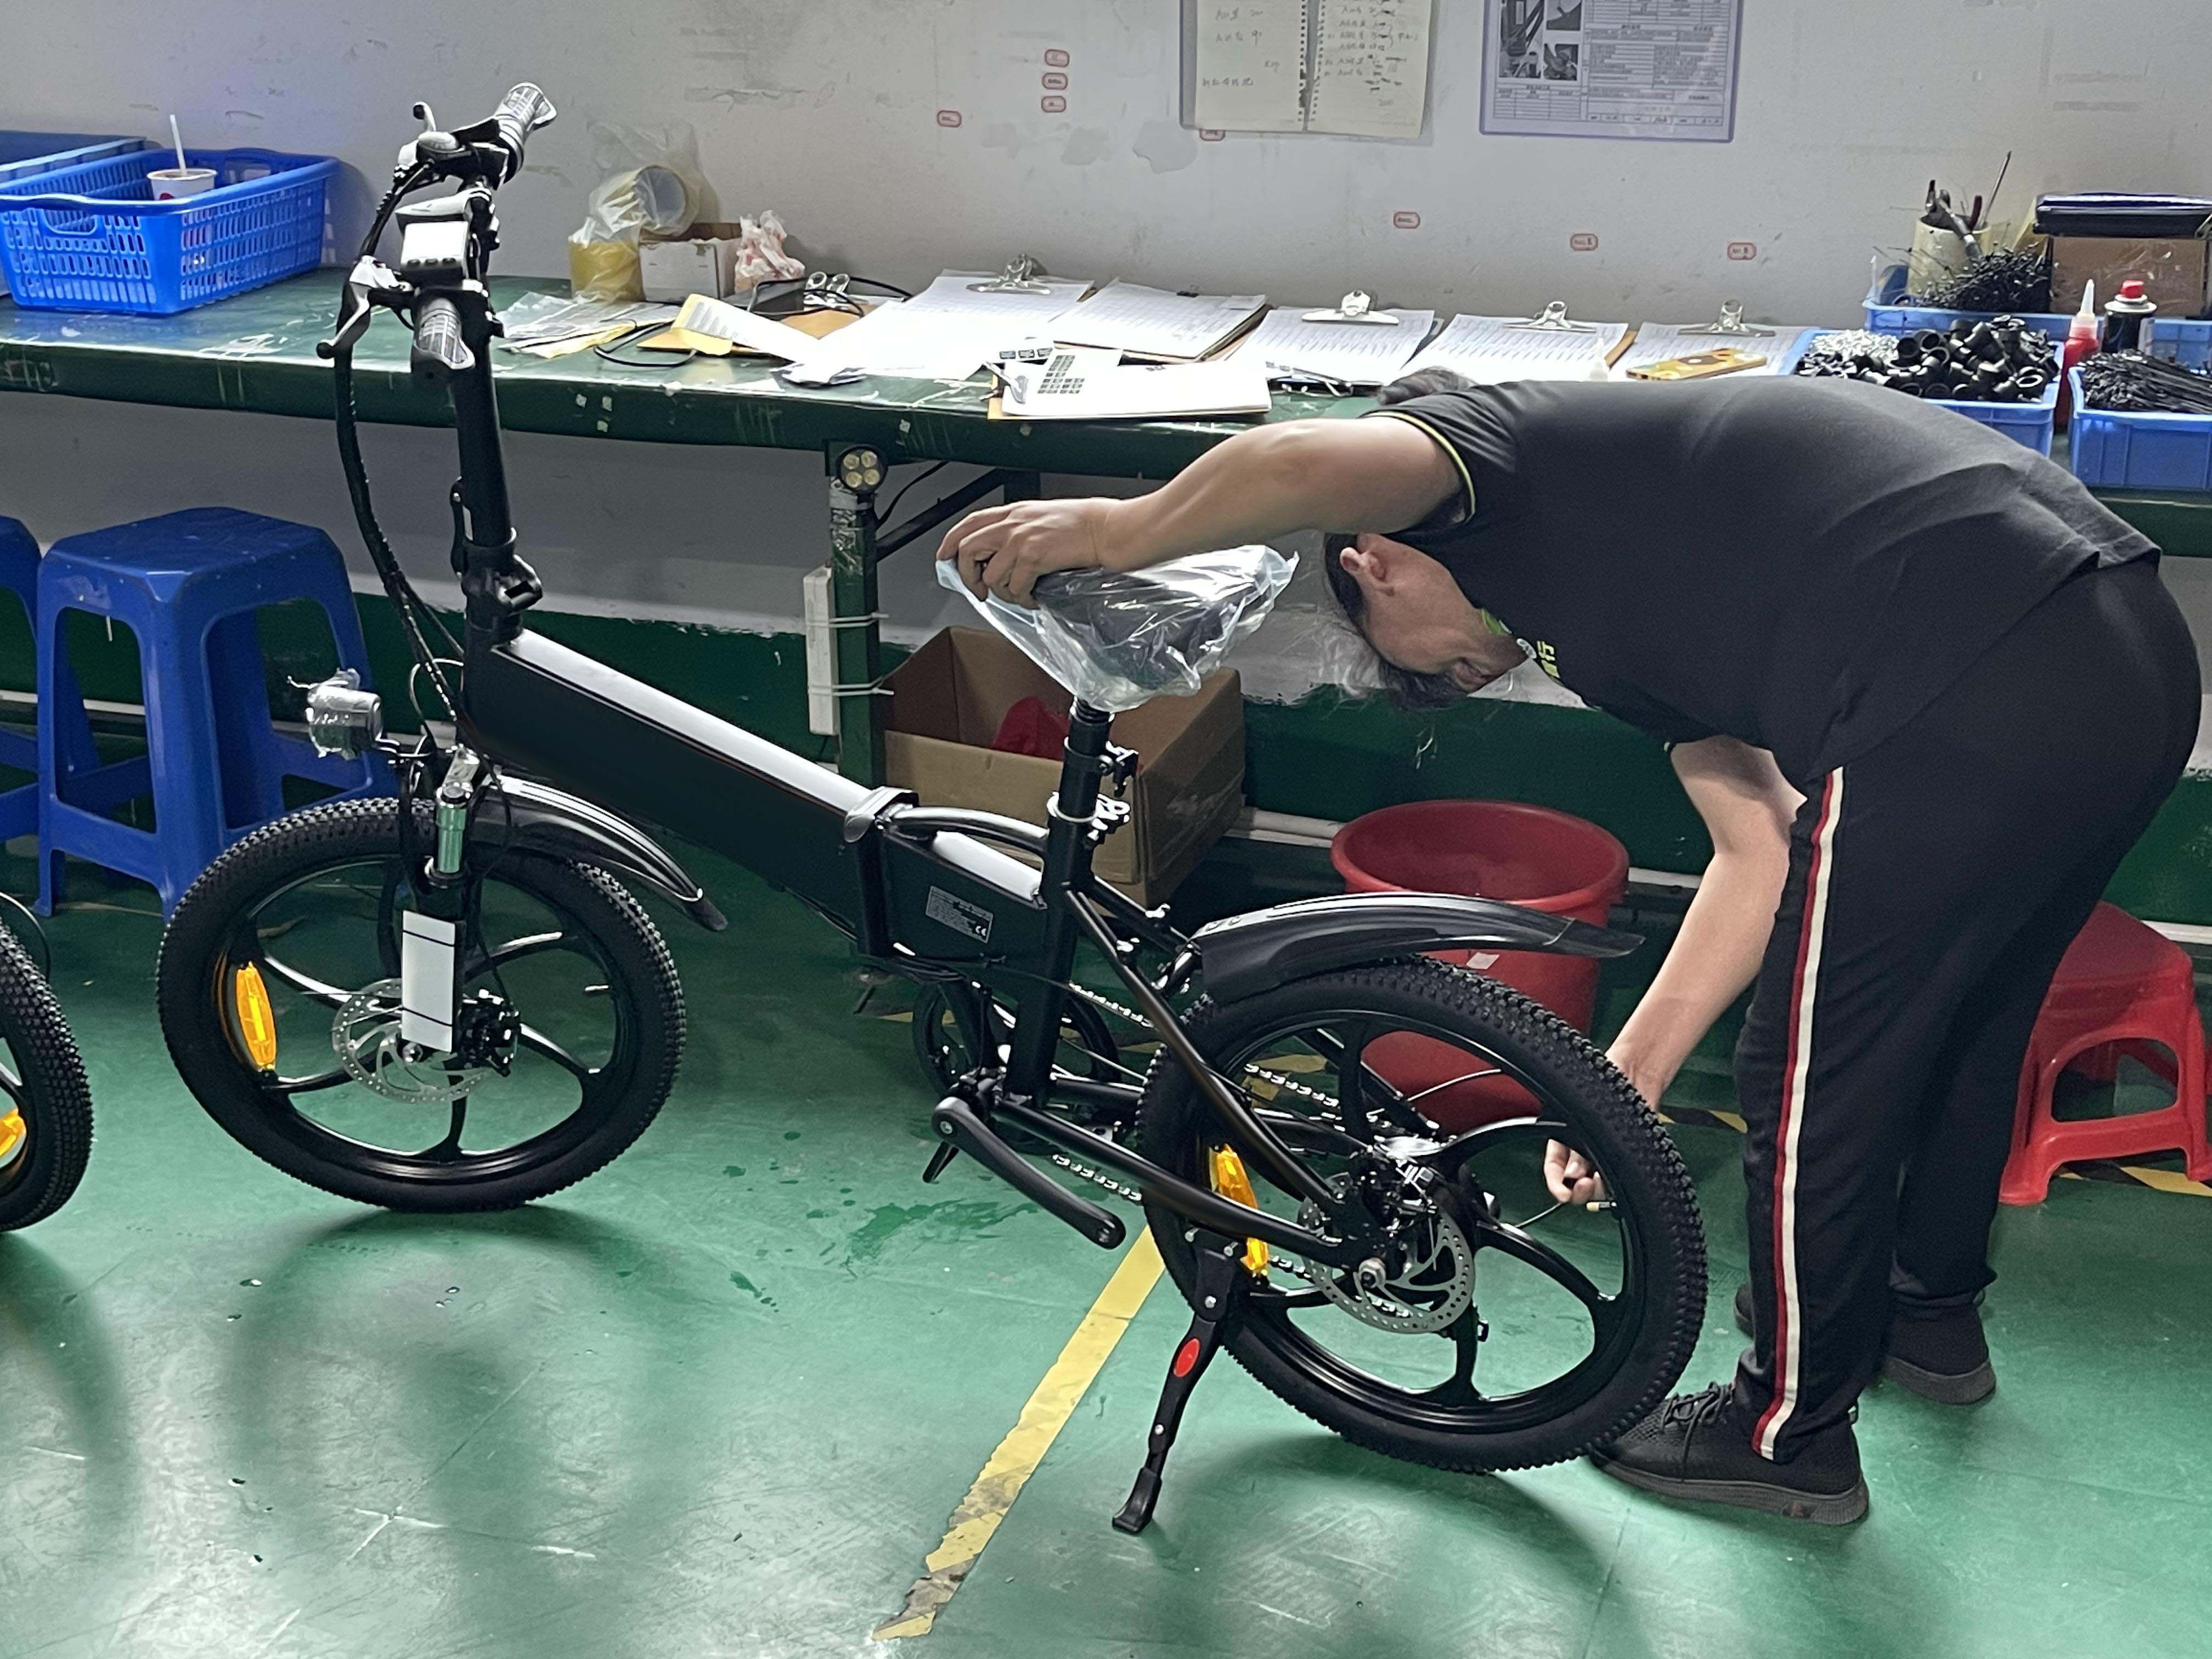 Workers check electric bicycles